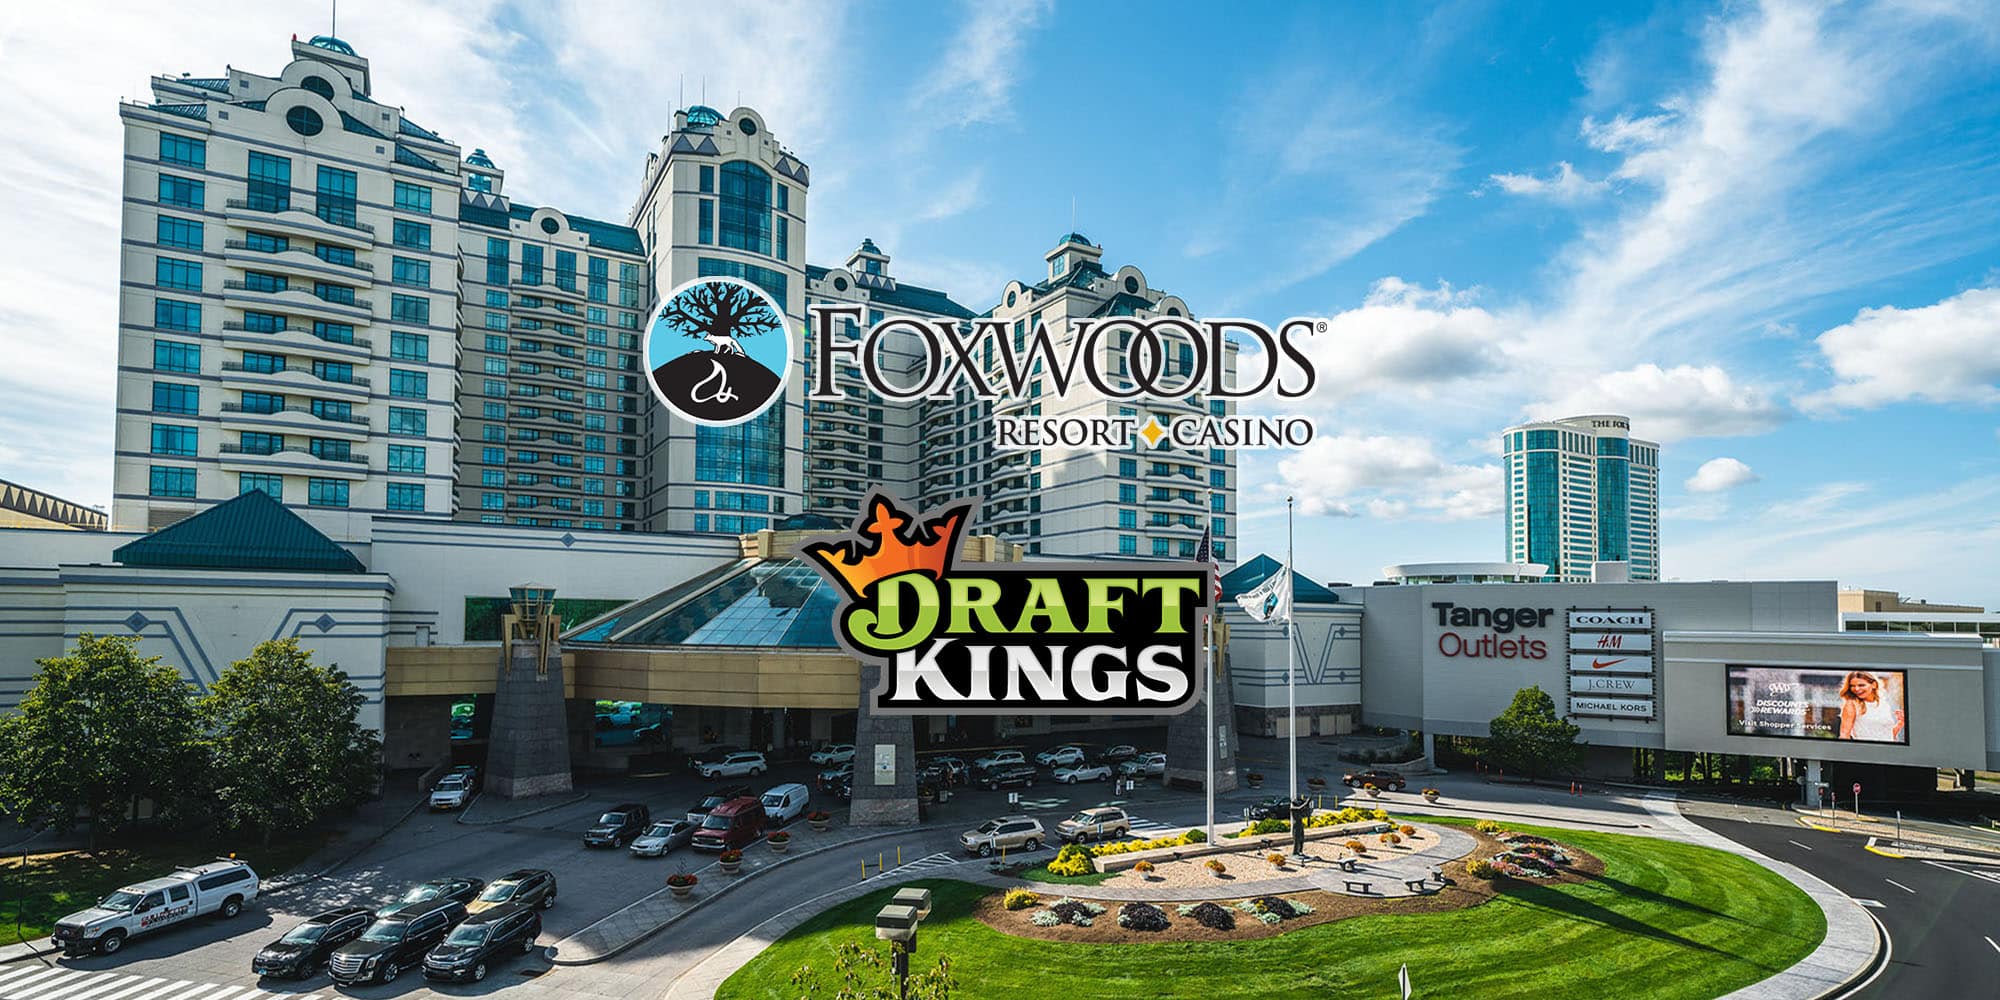 Connecticut Online Casino Foxwoods DraftKings